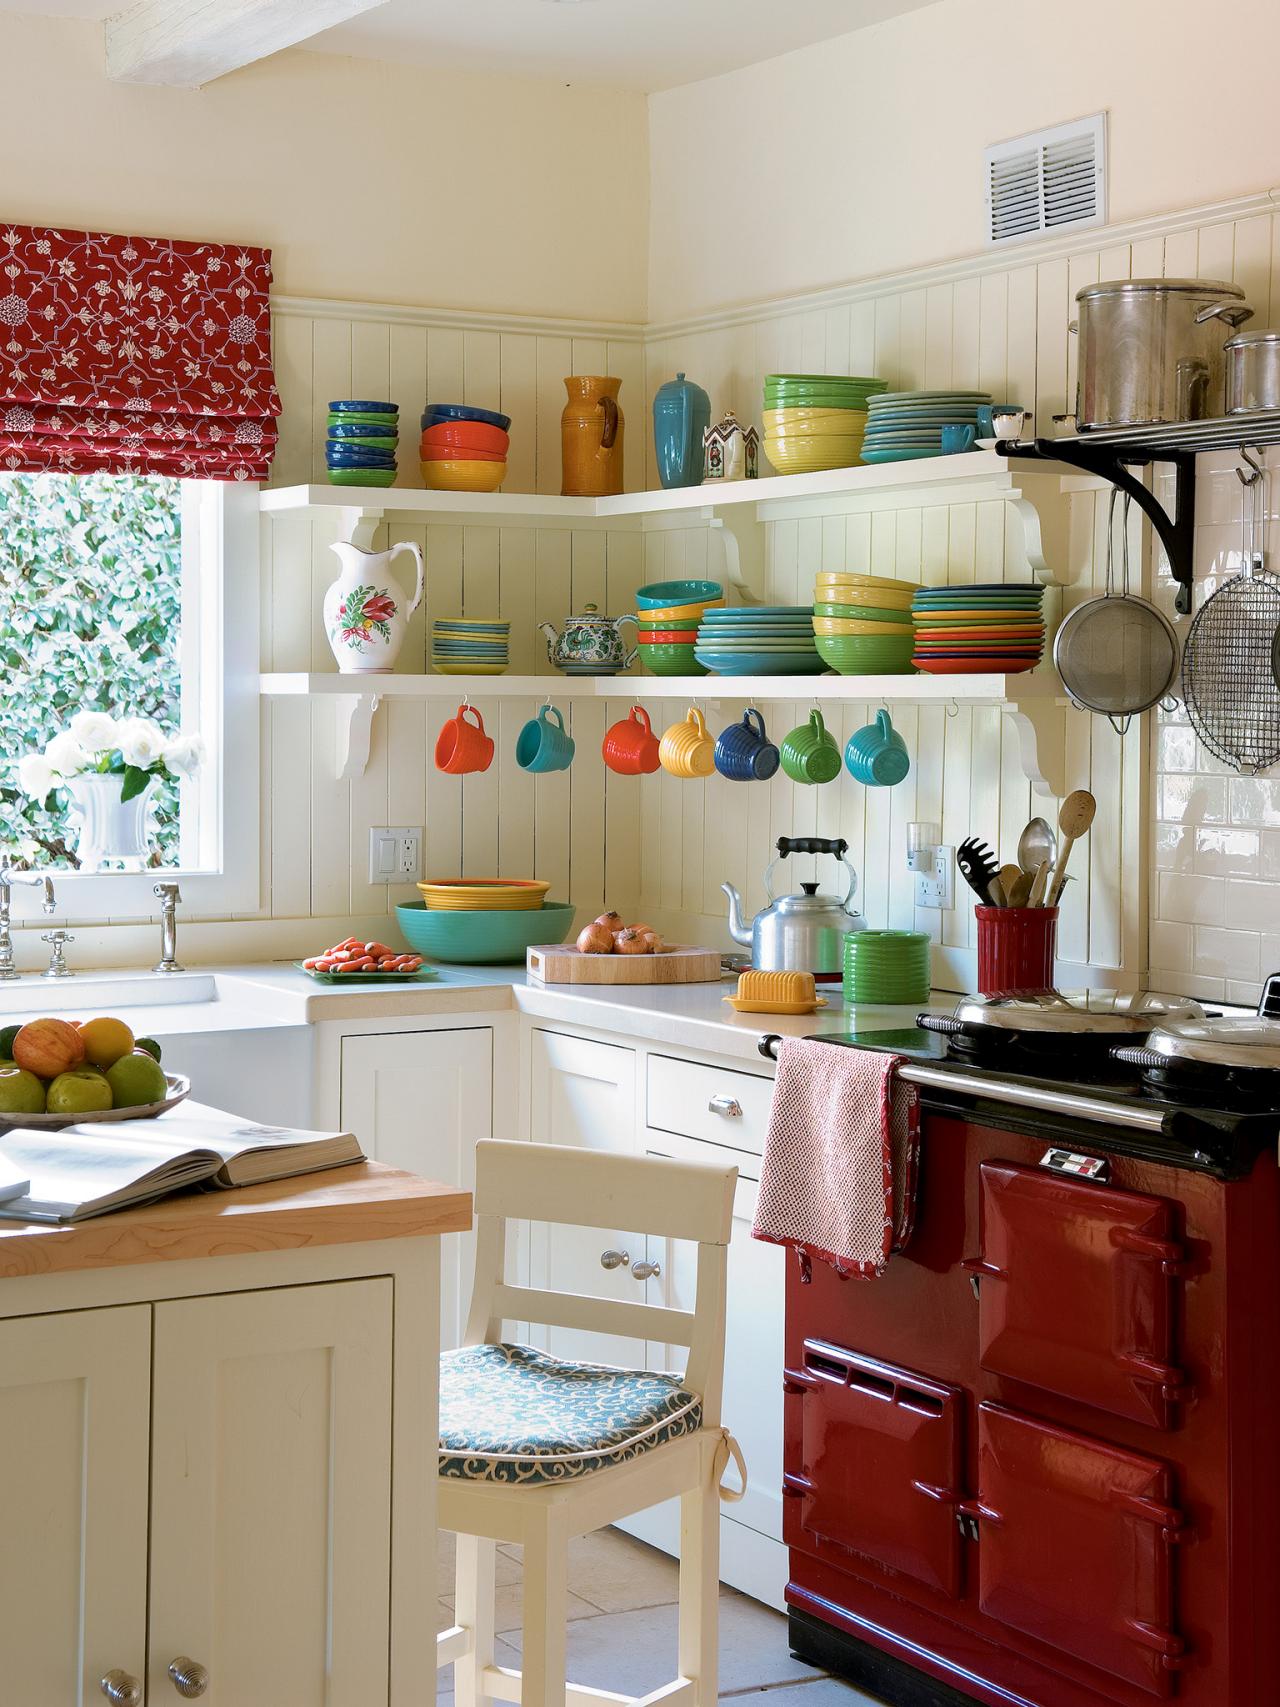 20 Best Small Kitchen Ideas and Designs that are Stylish in 20